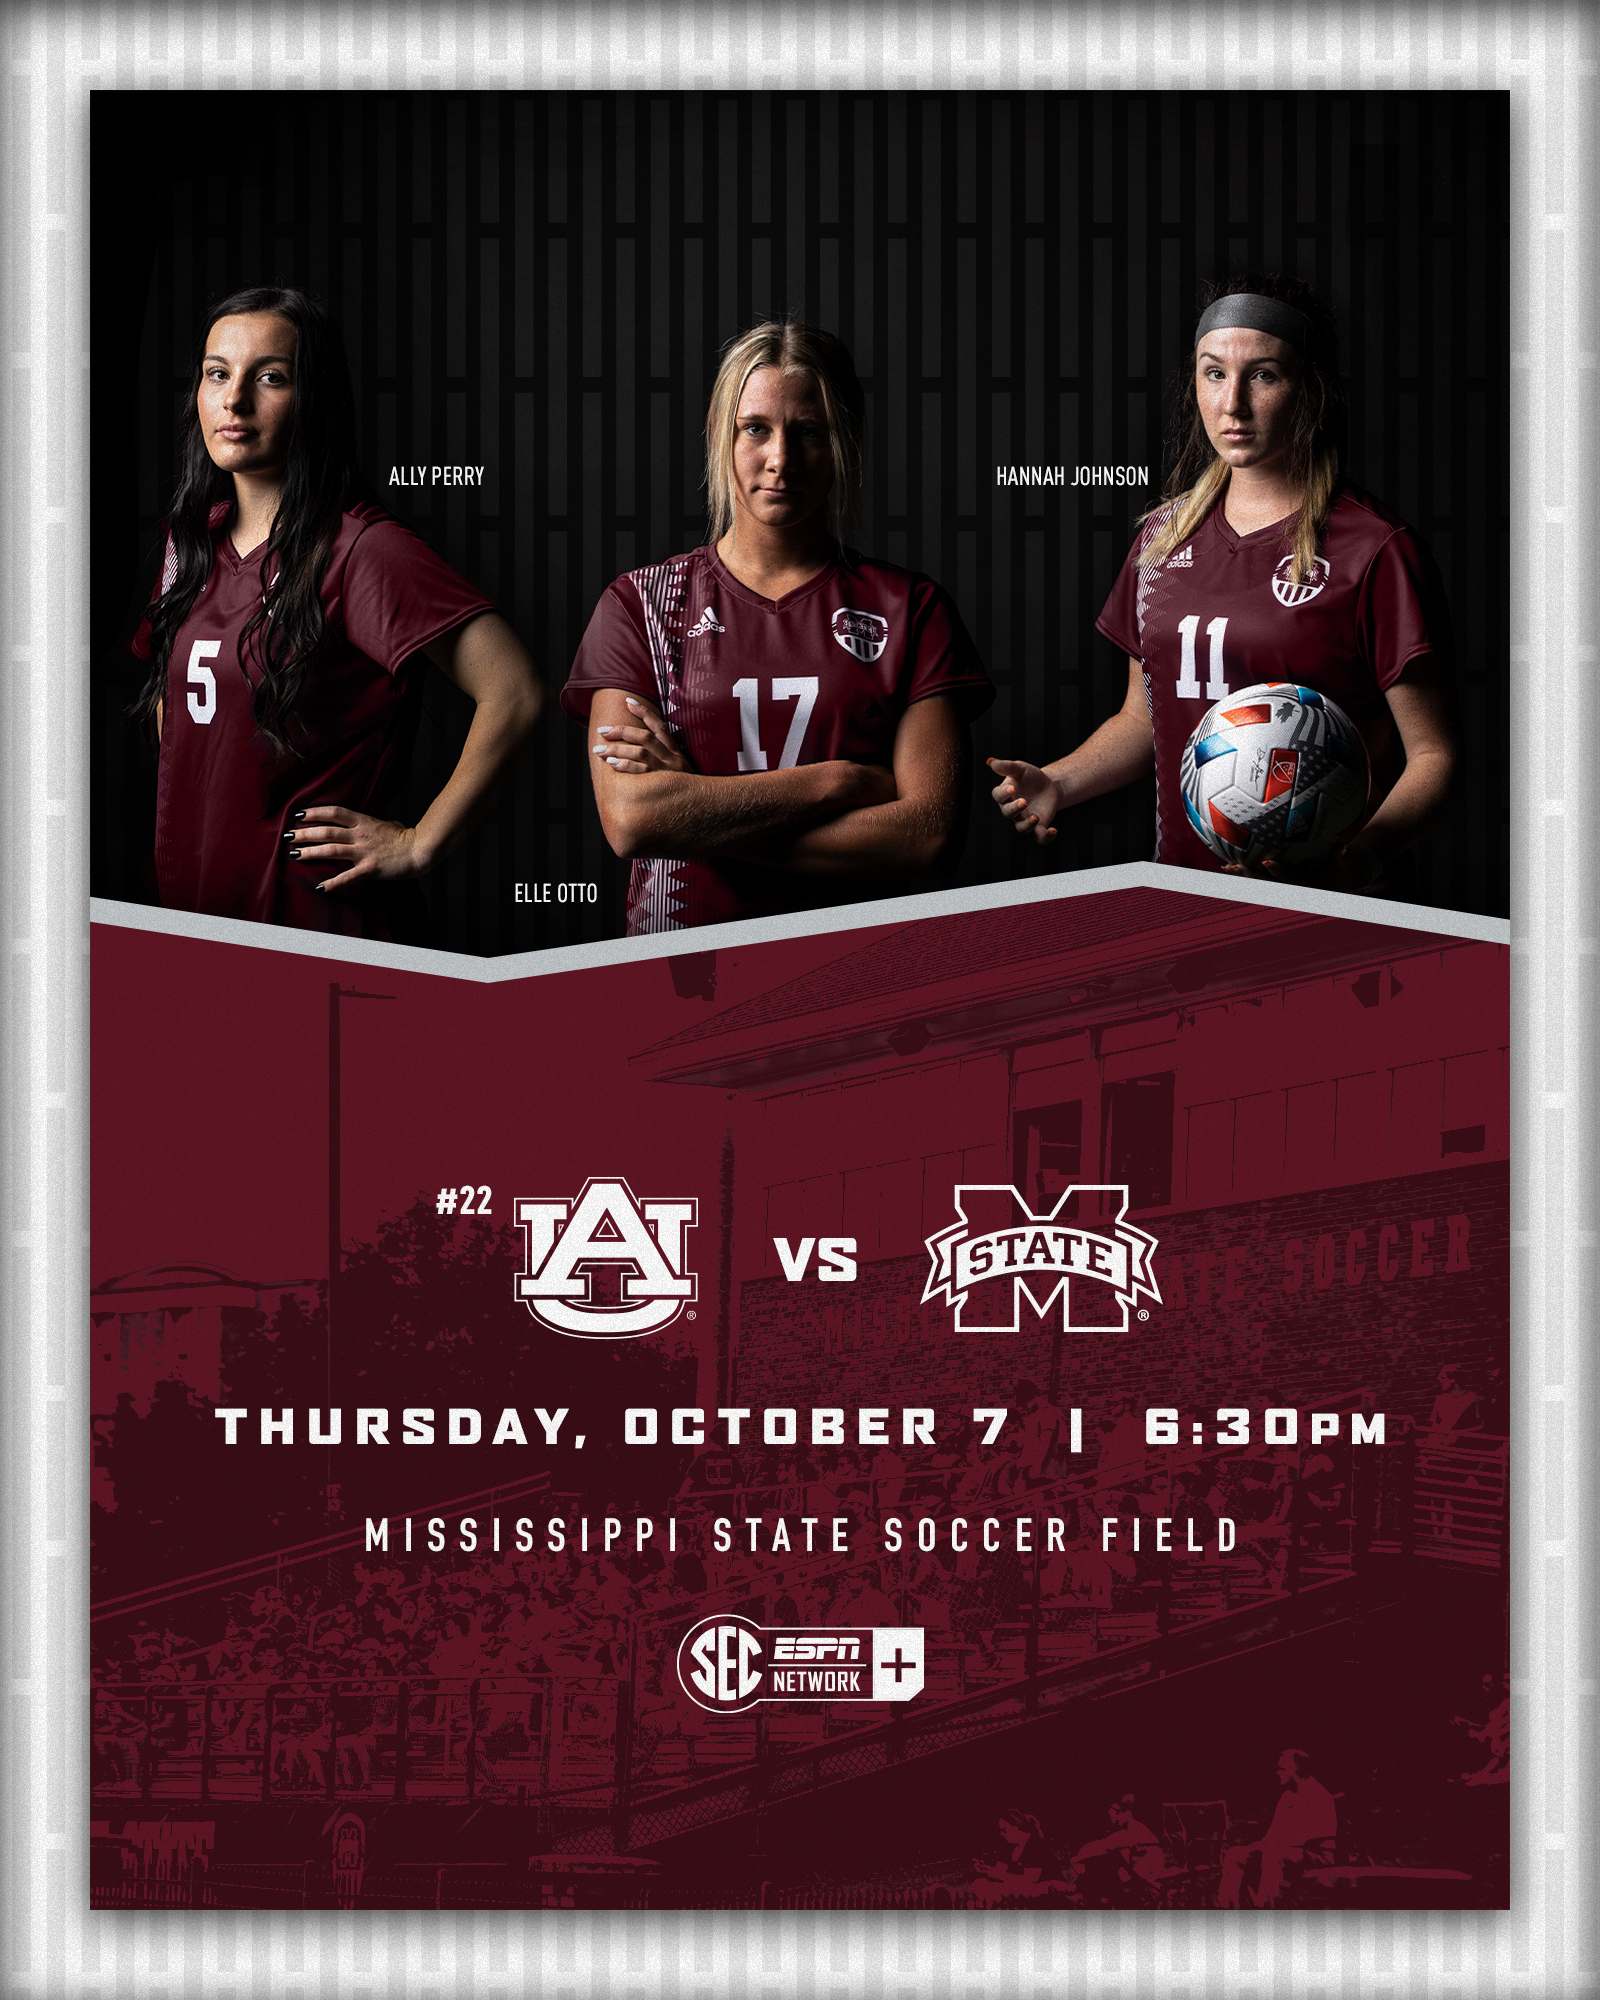 Maroon, white and black match day graphic with images of MSU soccer players Ally Perry, Elle Otto and Hannah Johnson